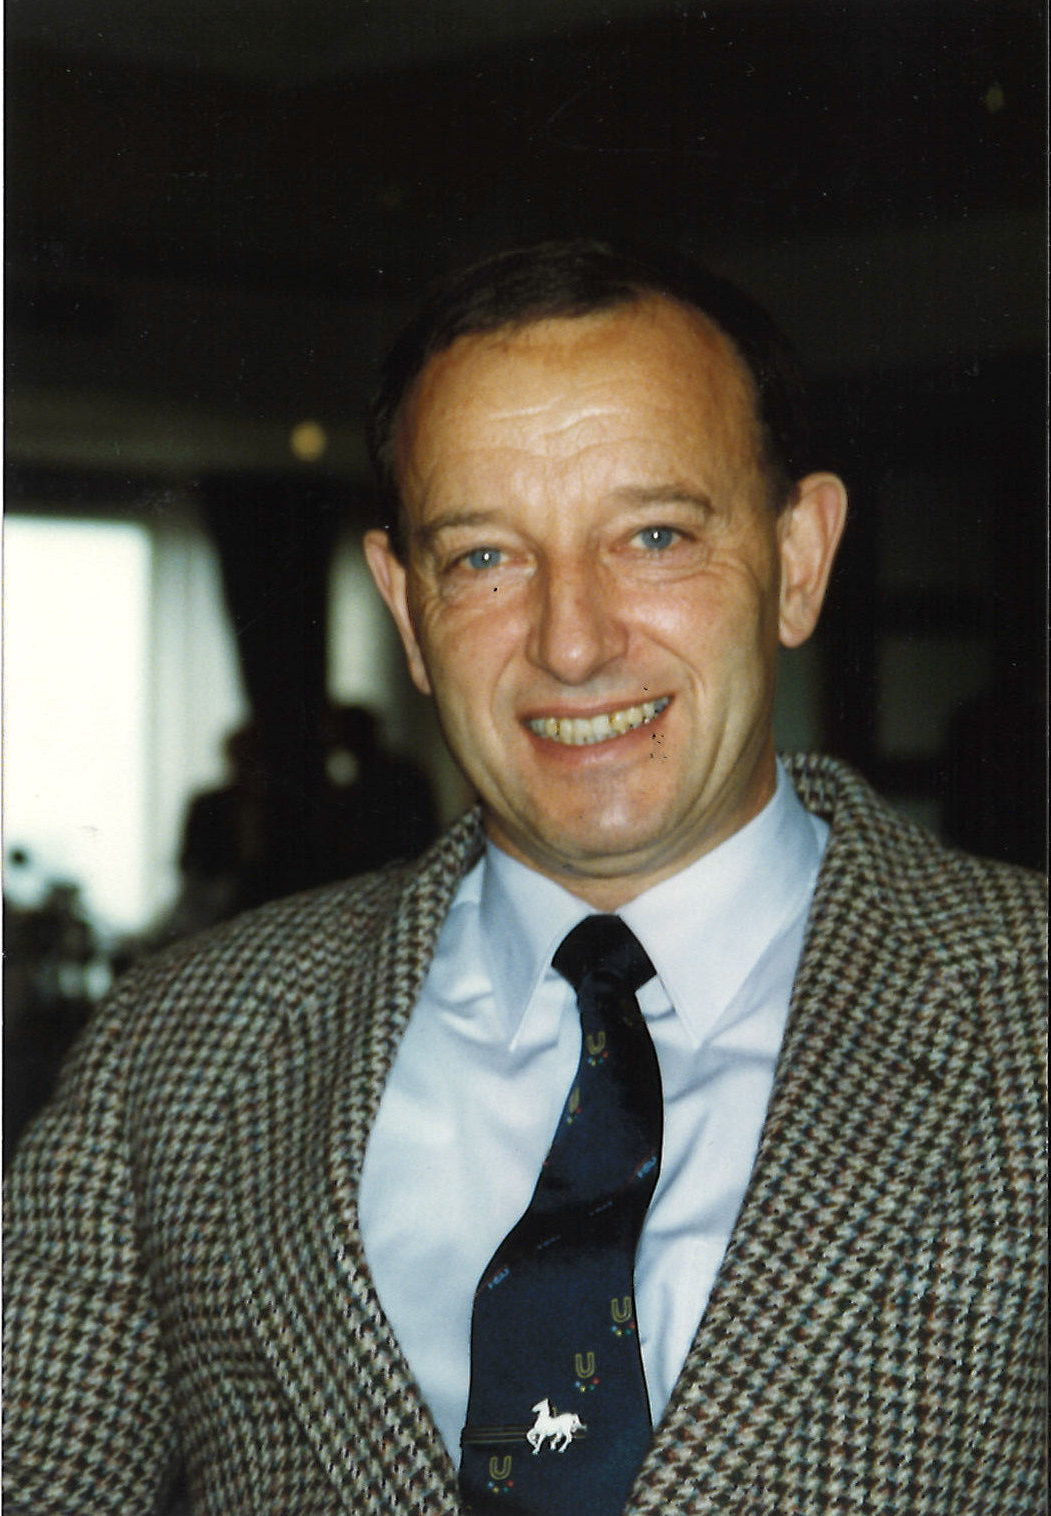 The Lucerne 2021 Winter Universiade will be dedicated to the late Fritz Holzer, former FISU vice-president ©FISU